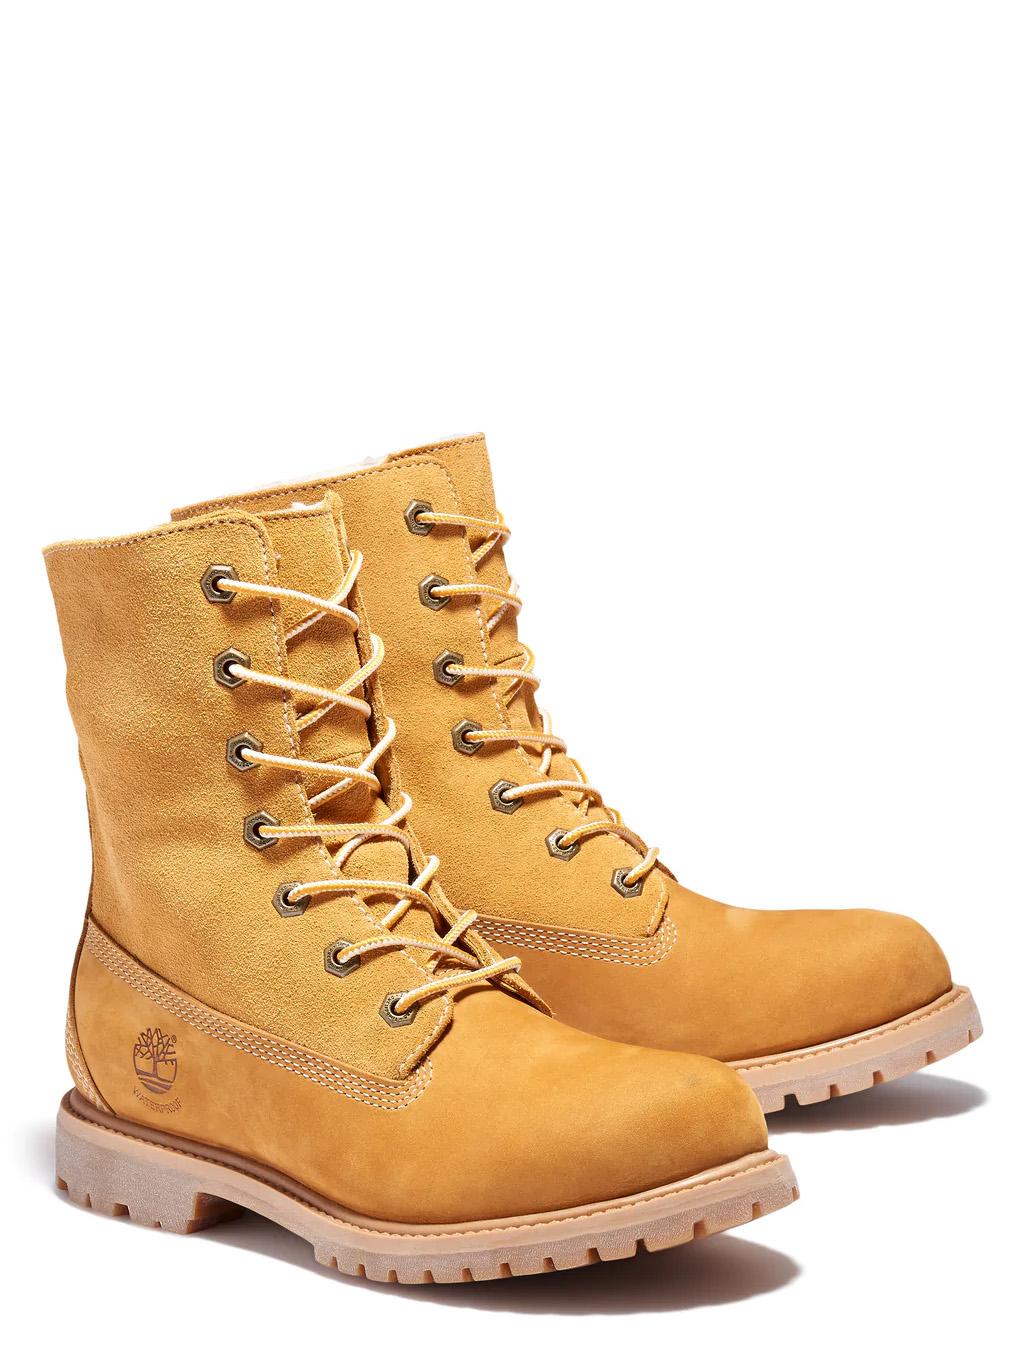 Timberland Authentic Fold-Over Botines Acolchados - ¡Compra En Le